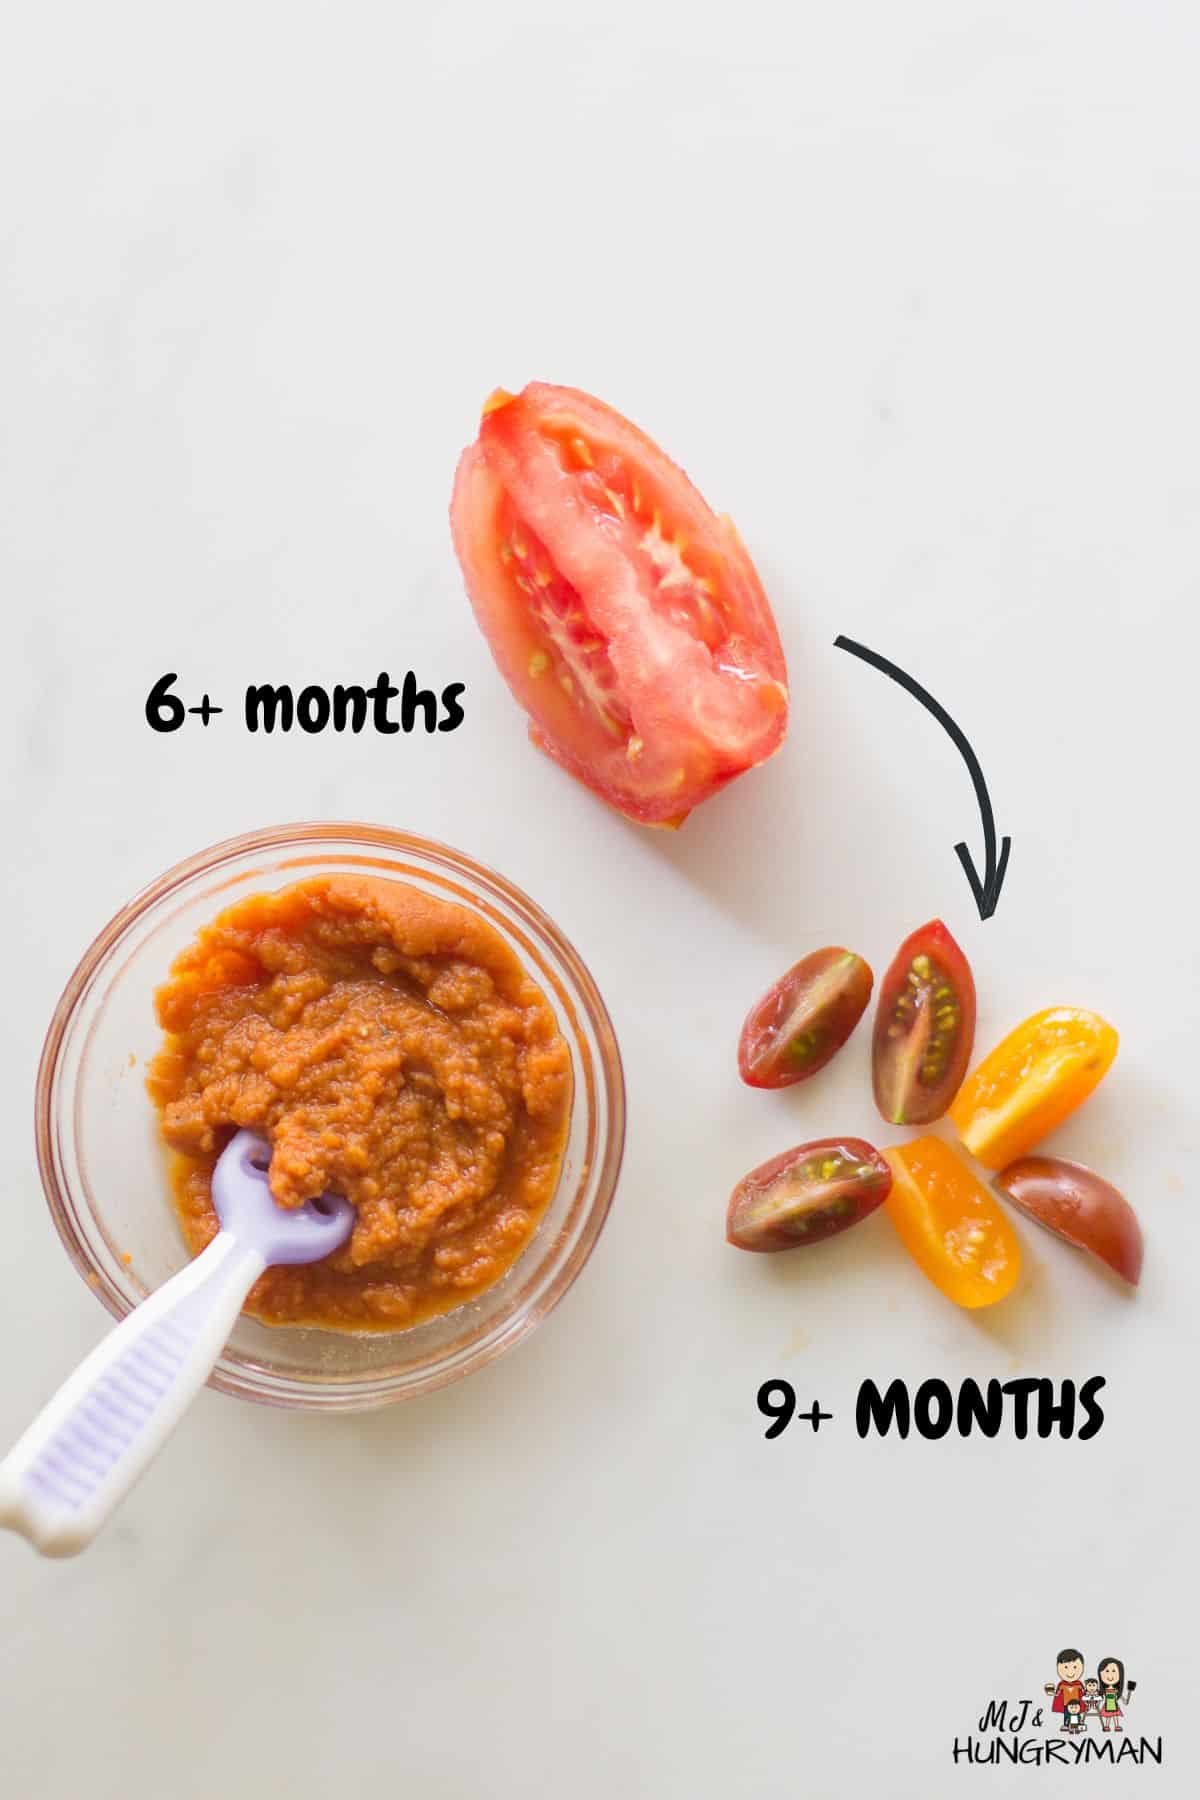 https://www.mjandhungryman.com/wp-content/uploads/2022/07/How-to-serve-tomatoes-to-babies.jpg